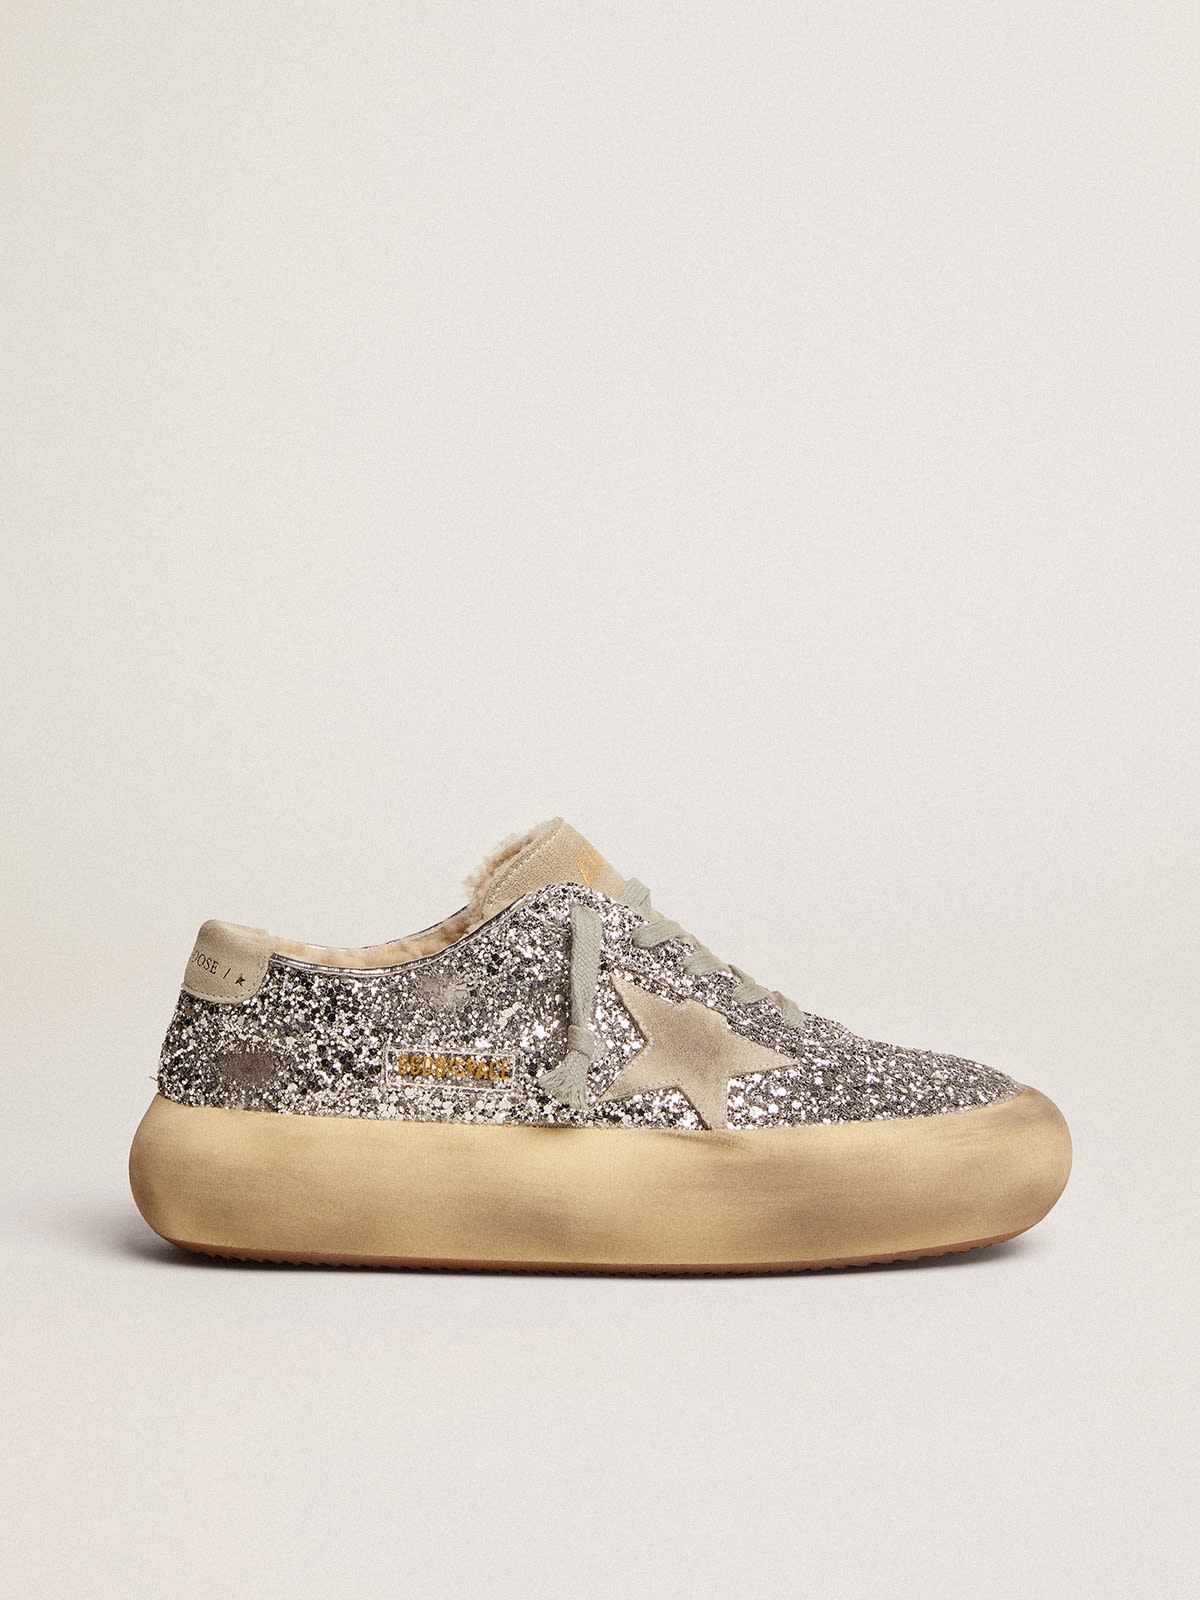 Women's Space-Star shoes in silver glitter with shearling lining - 1